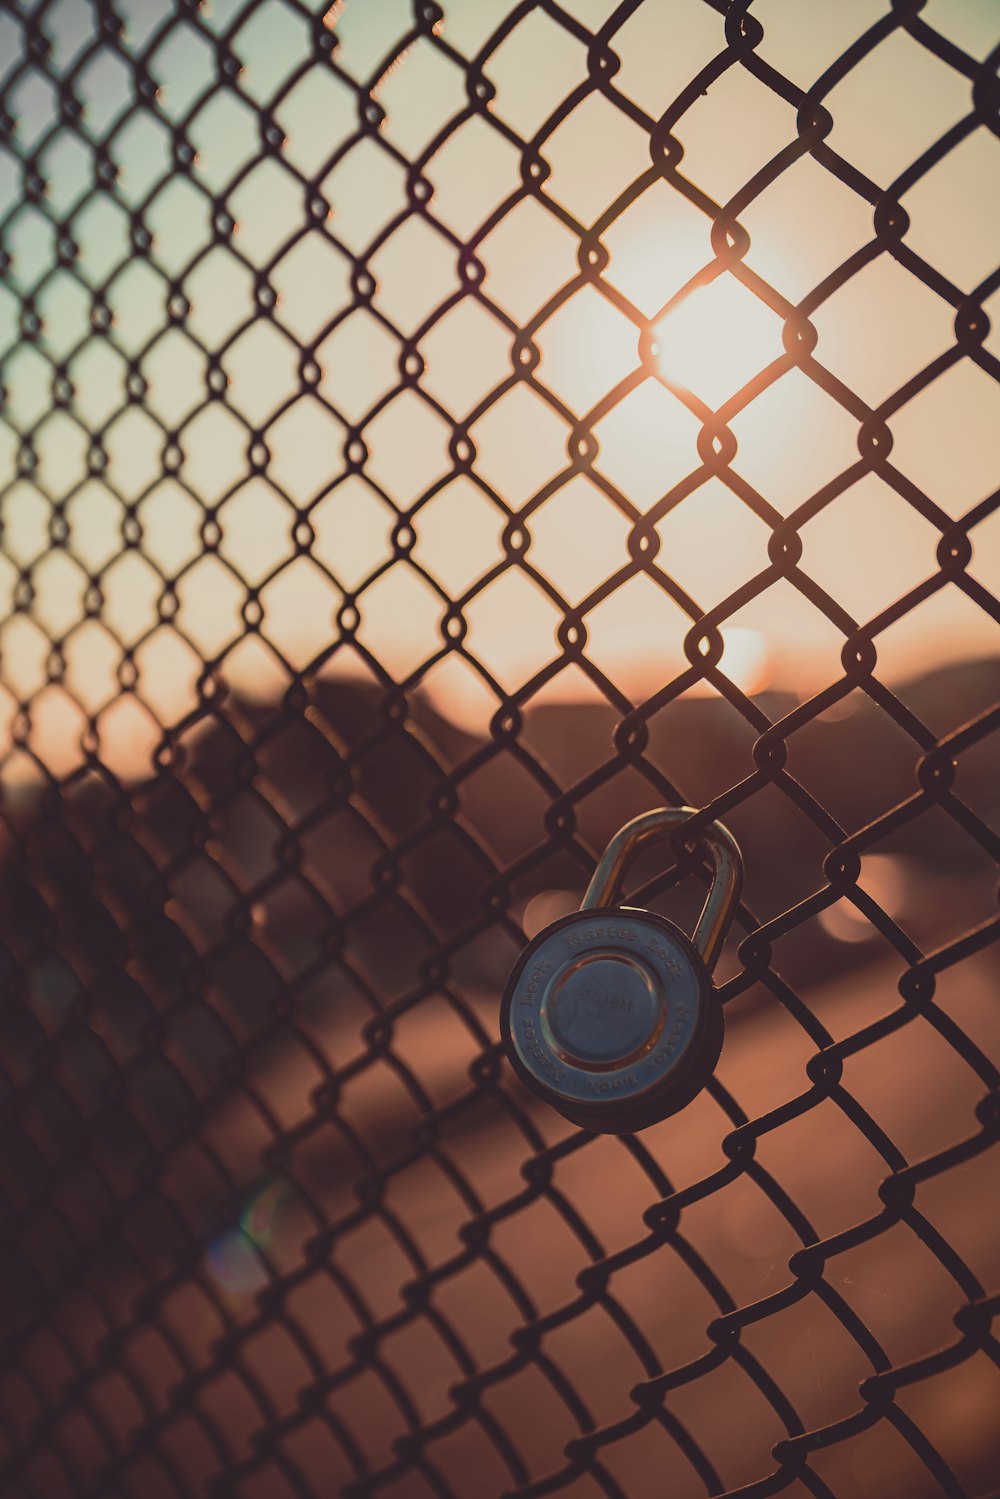 black and silver padlock on chain link fence